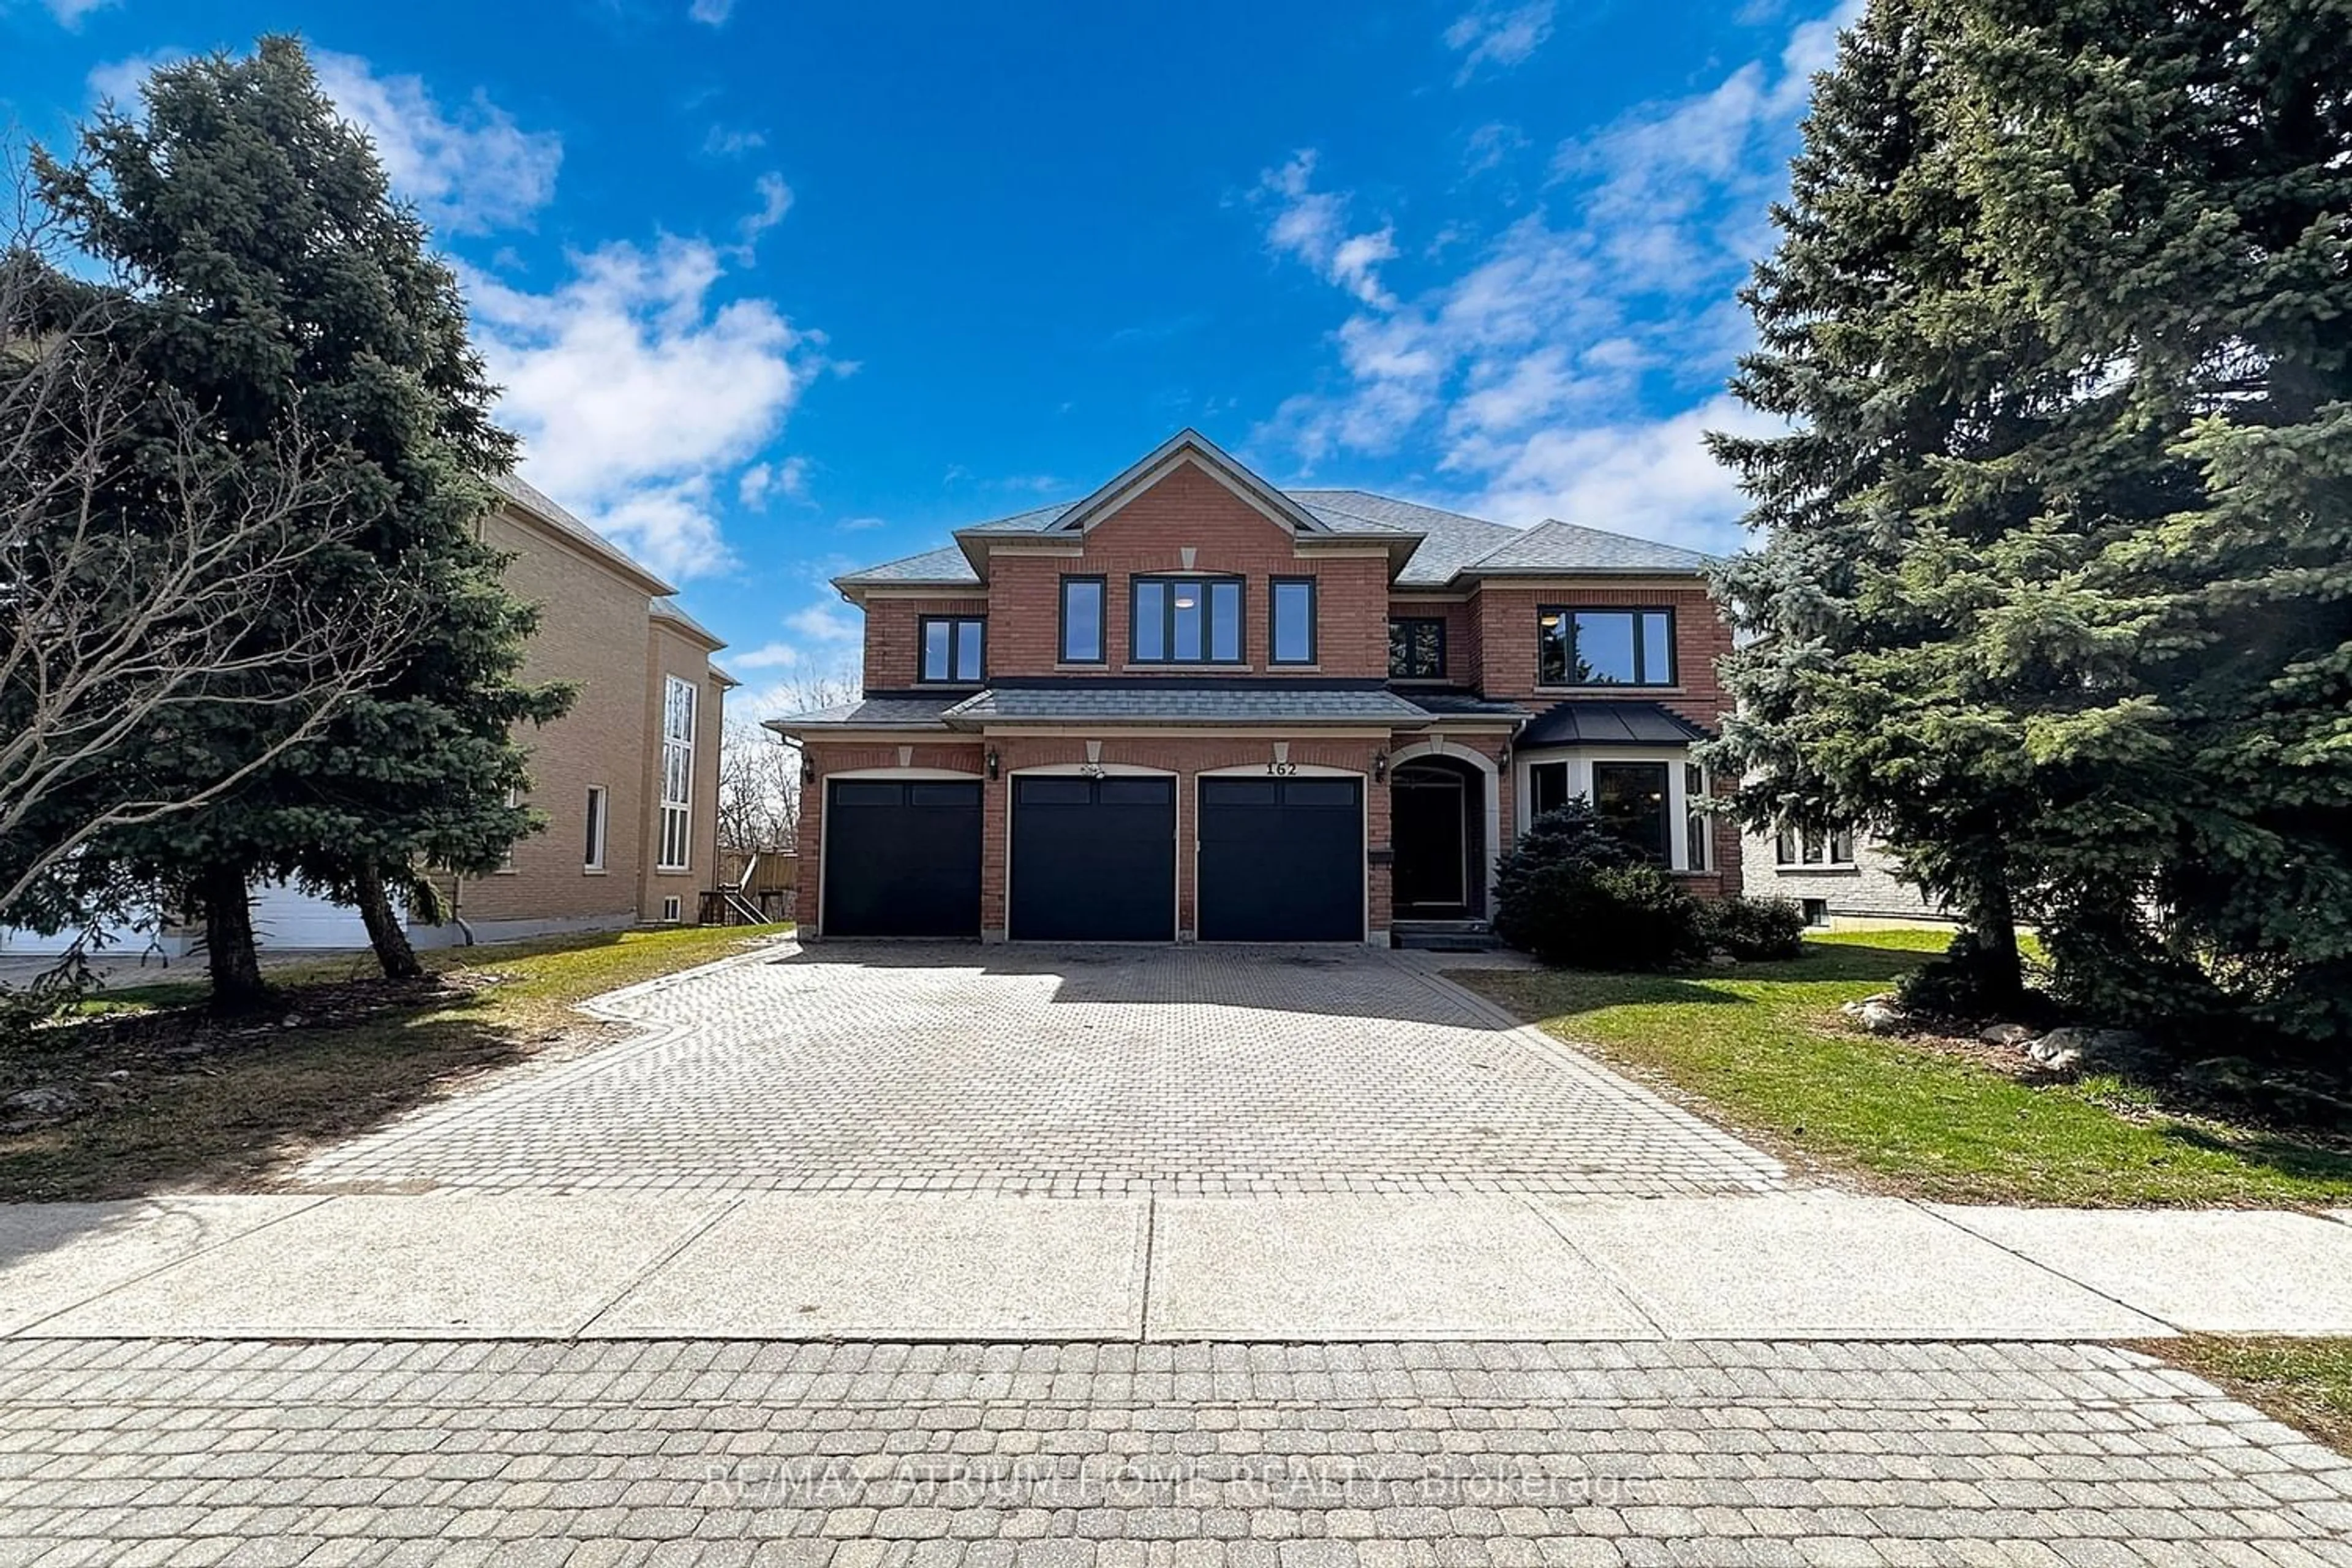 Home with brick exterior material for 162 Boake Tr, Richmond Hill Ontario L4B 3W8